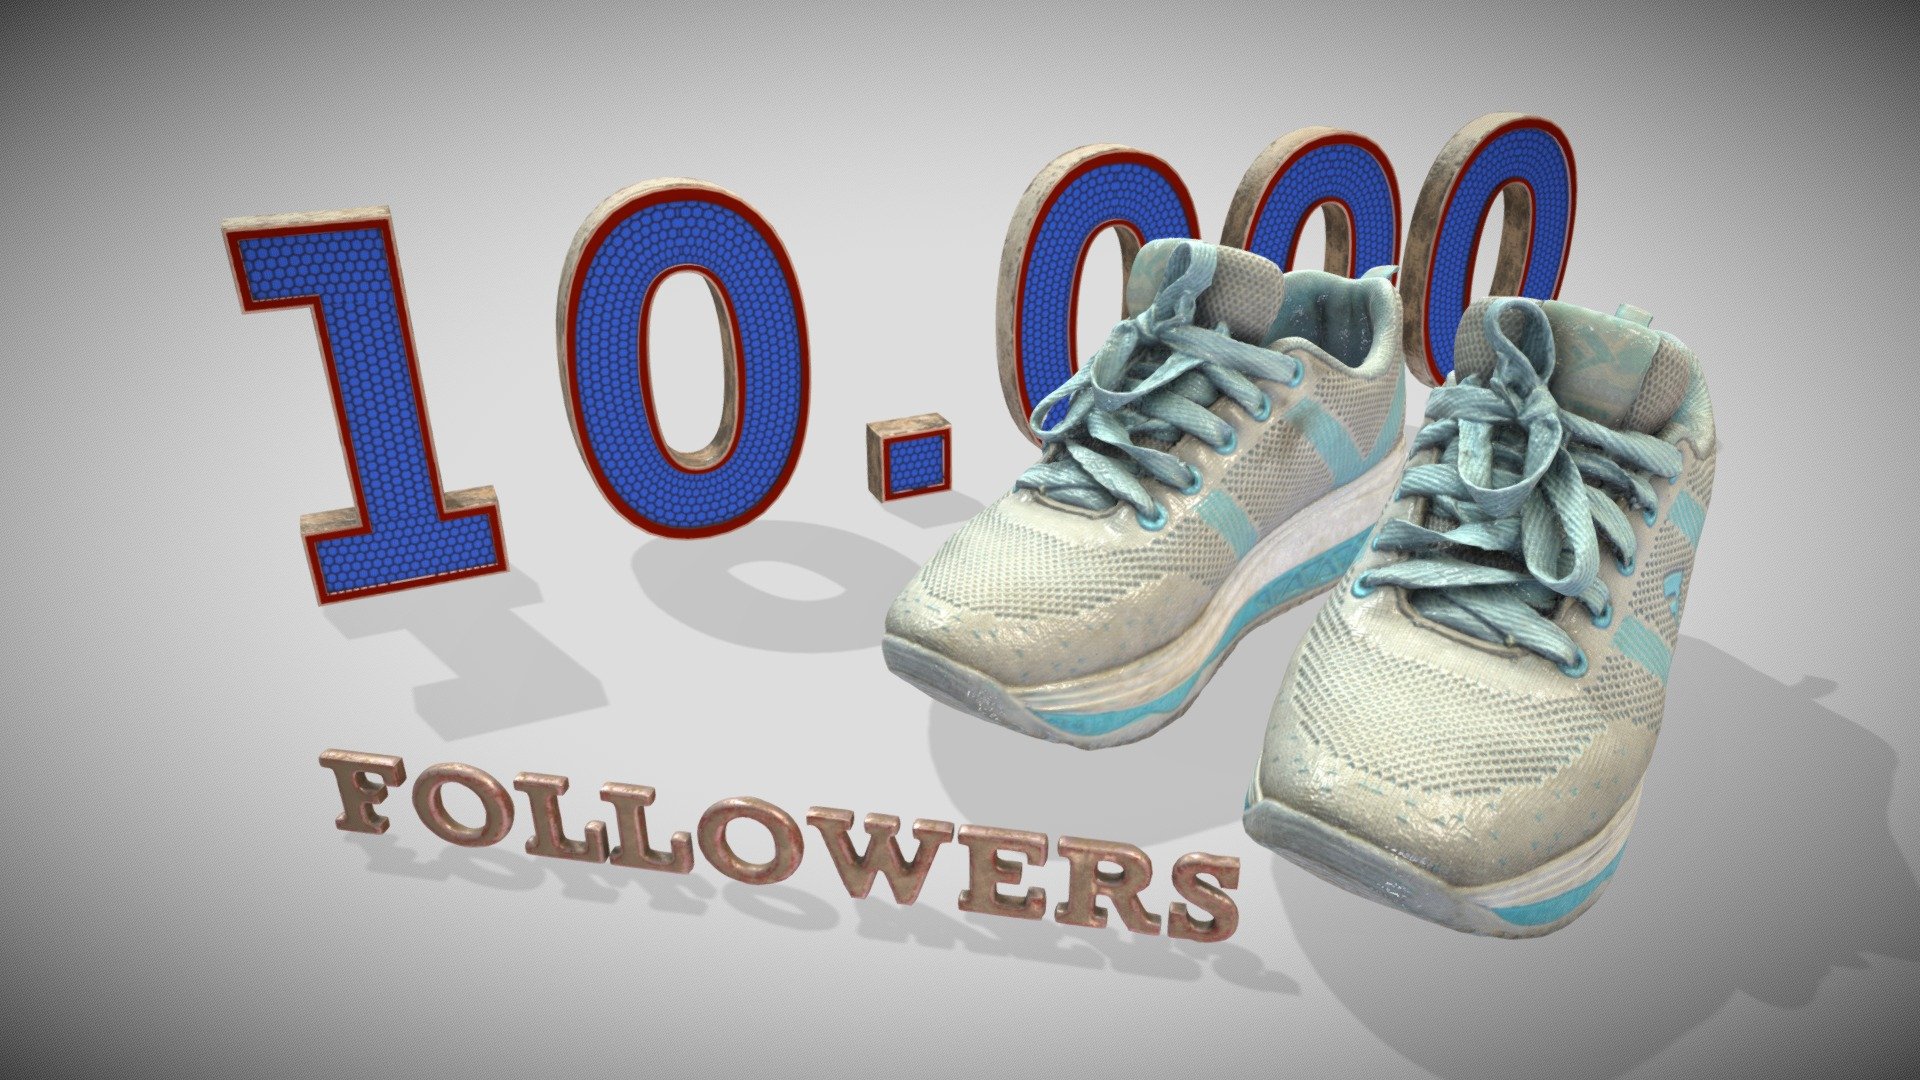 3 Material PBR Metalness

Shoes 4k

10.000 4k

Followers 2k

Thank You to All my Followers and to Sketchfab Team - Milestone 10.000 Followers - Download Free 3D model by Francesco Coldesina (@topfrank2013) 3d model